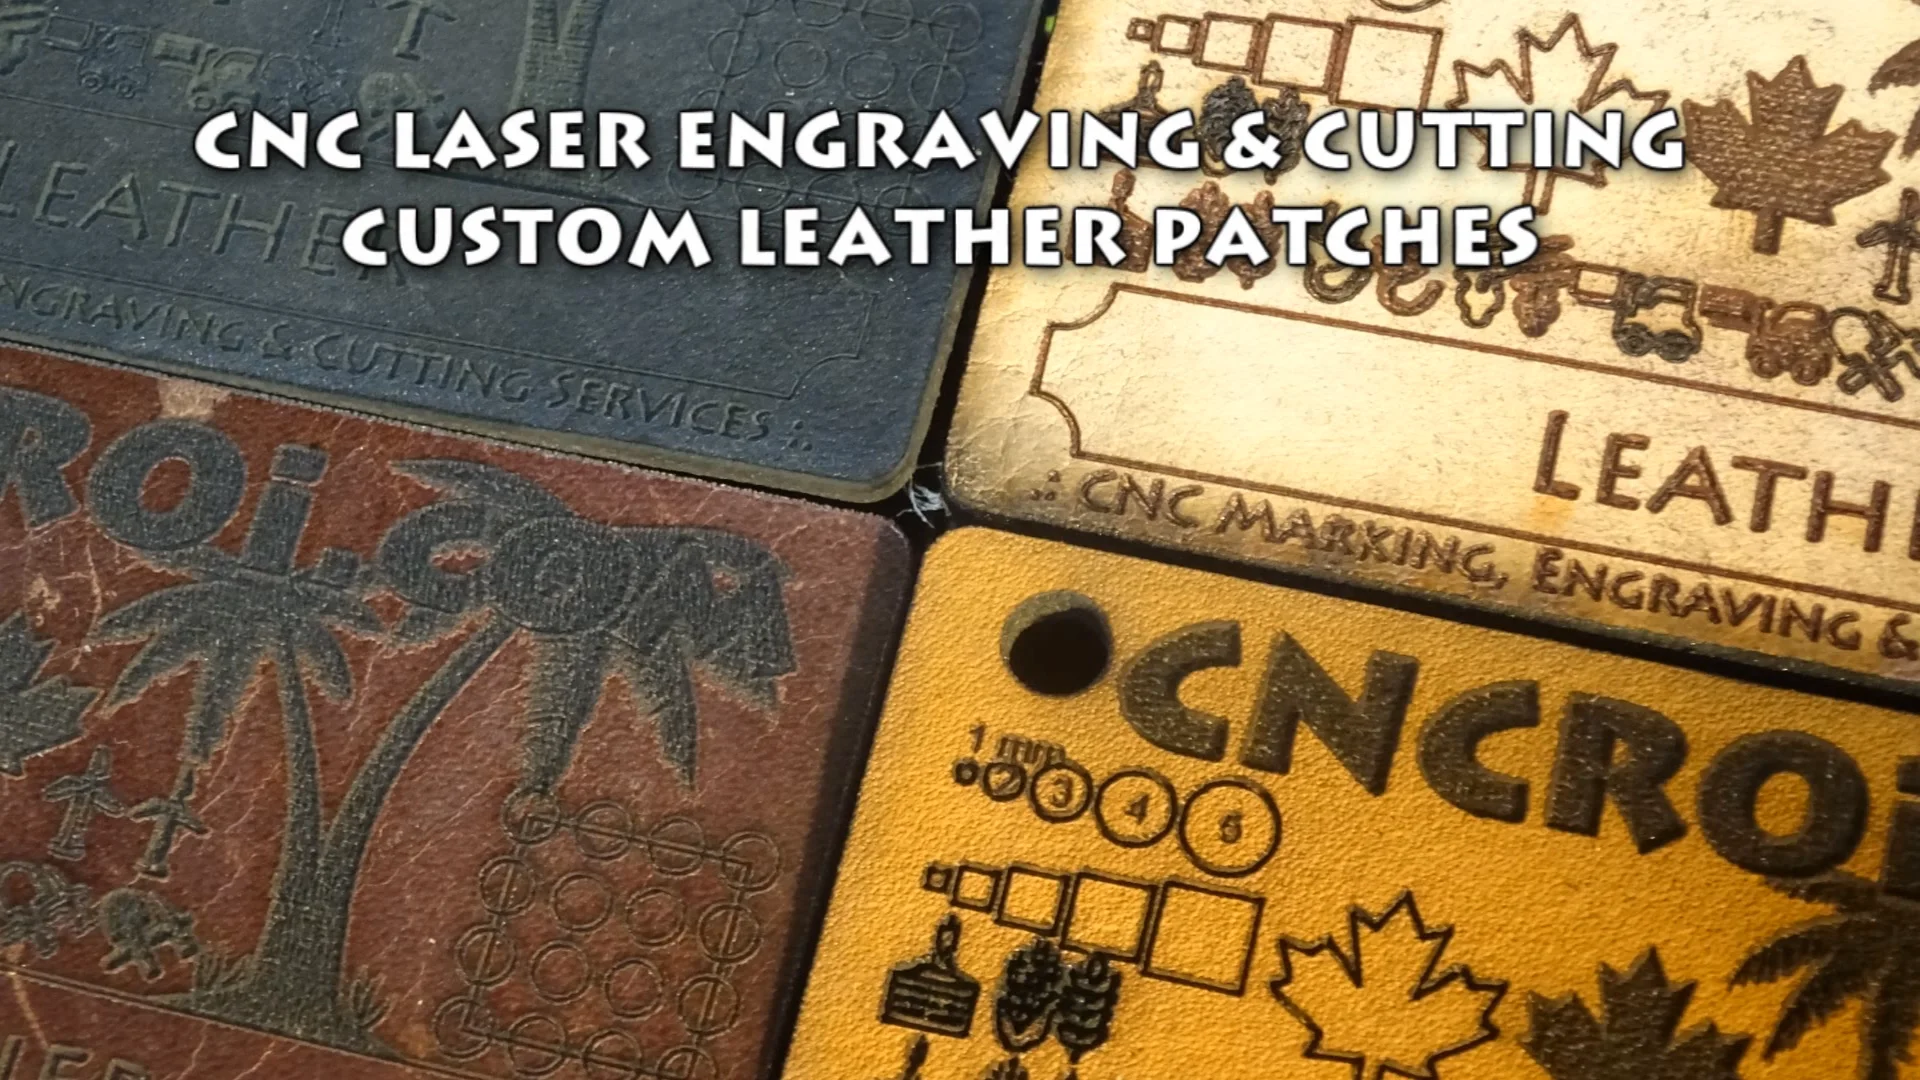 Laser engraving / cutting of leather - How Do I Do That